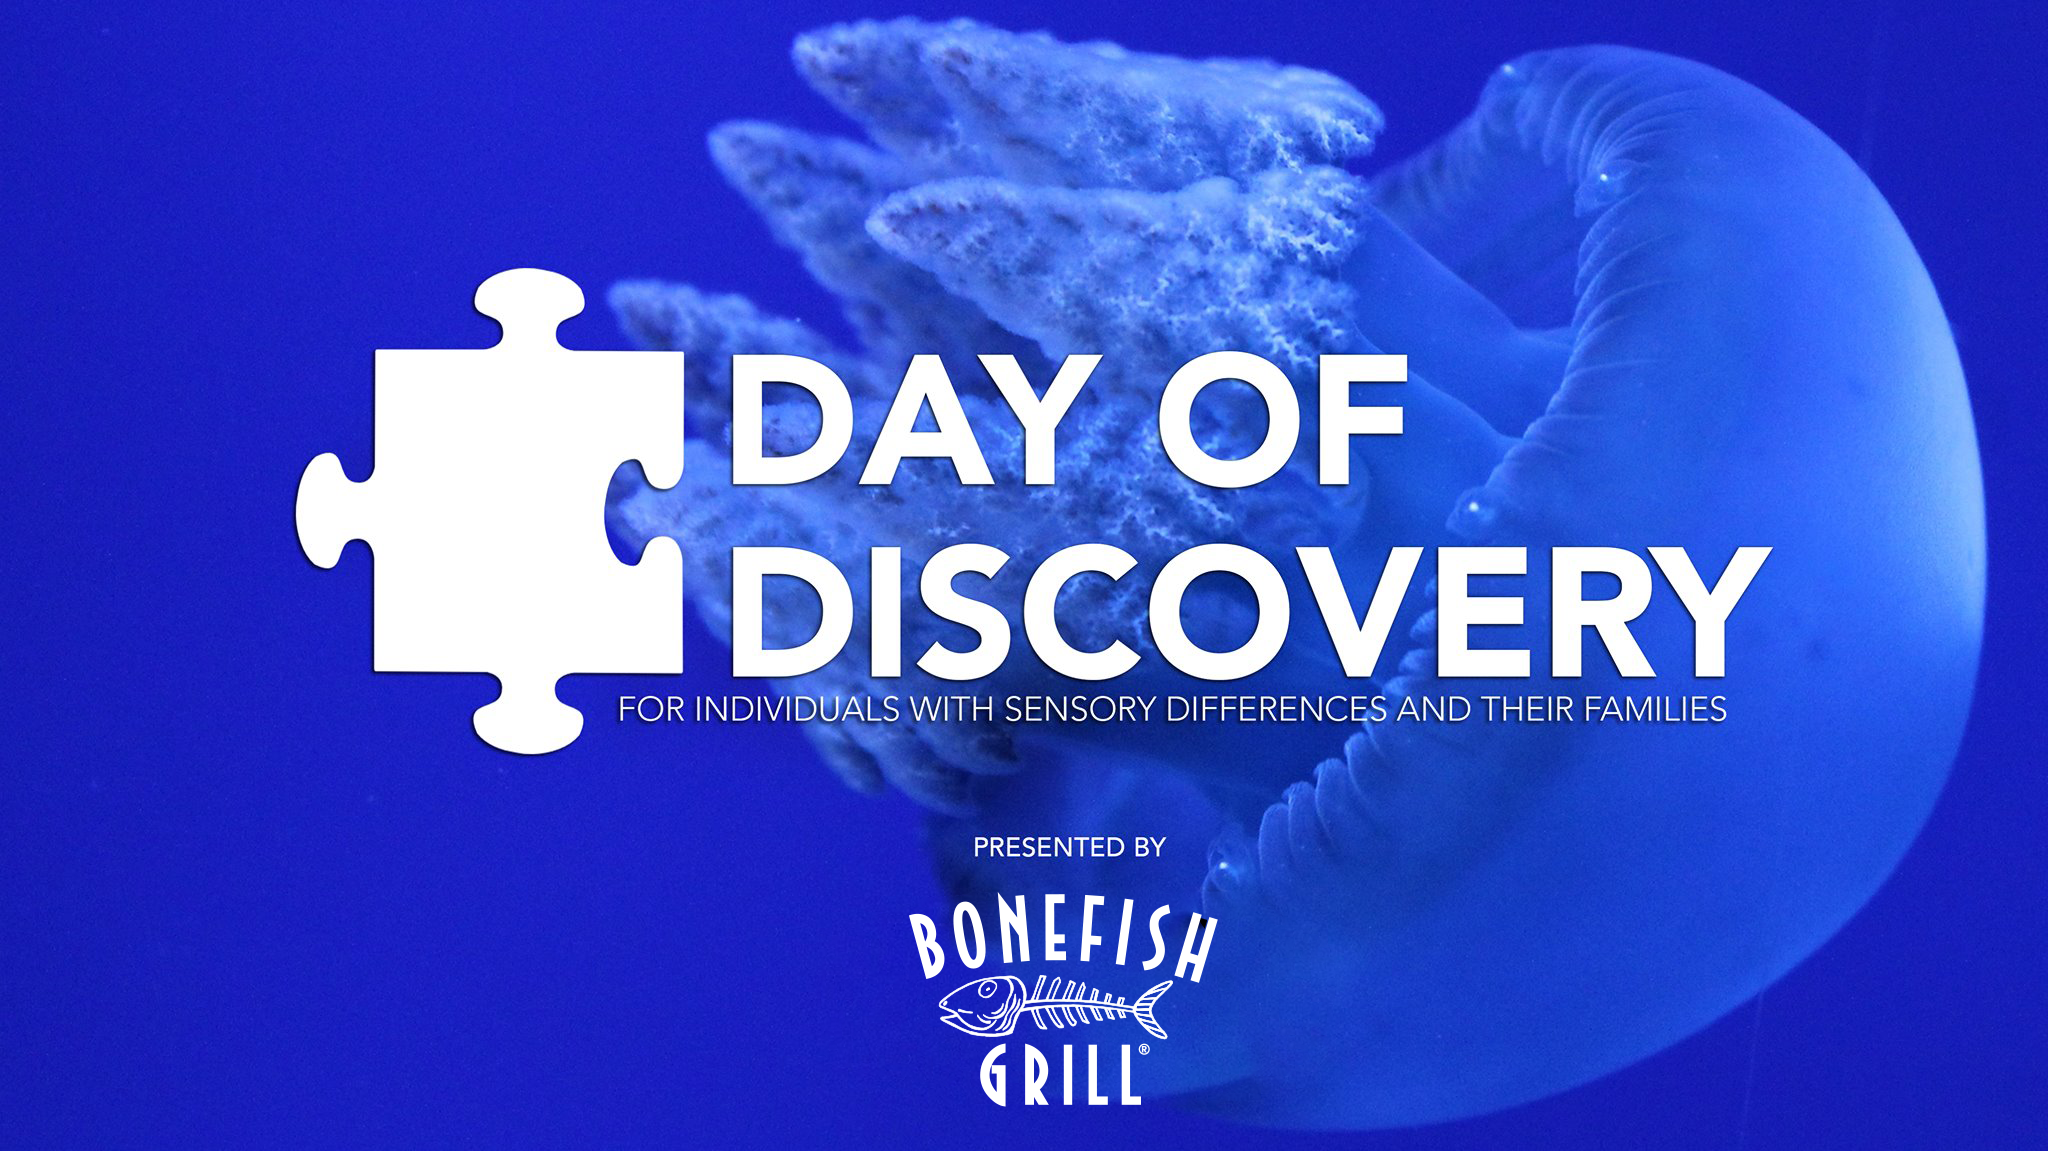 Day of Discovery